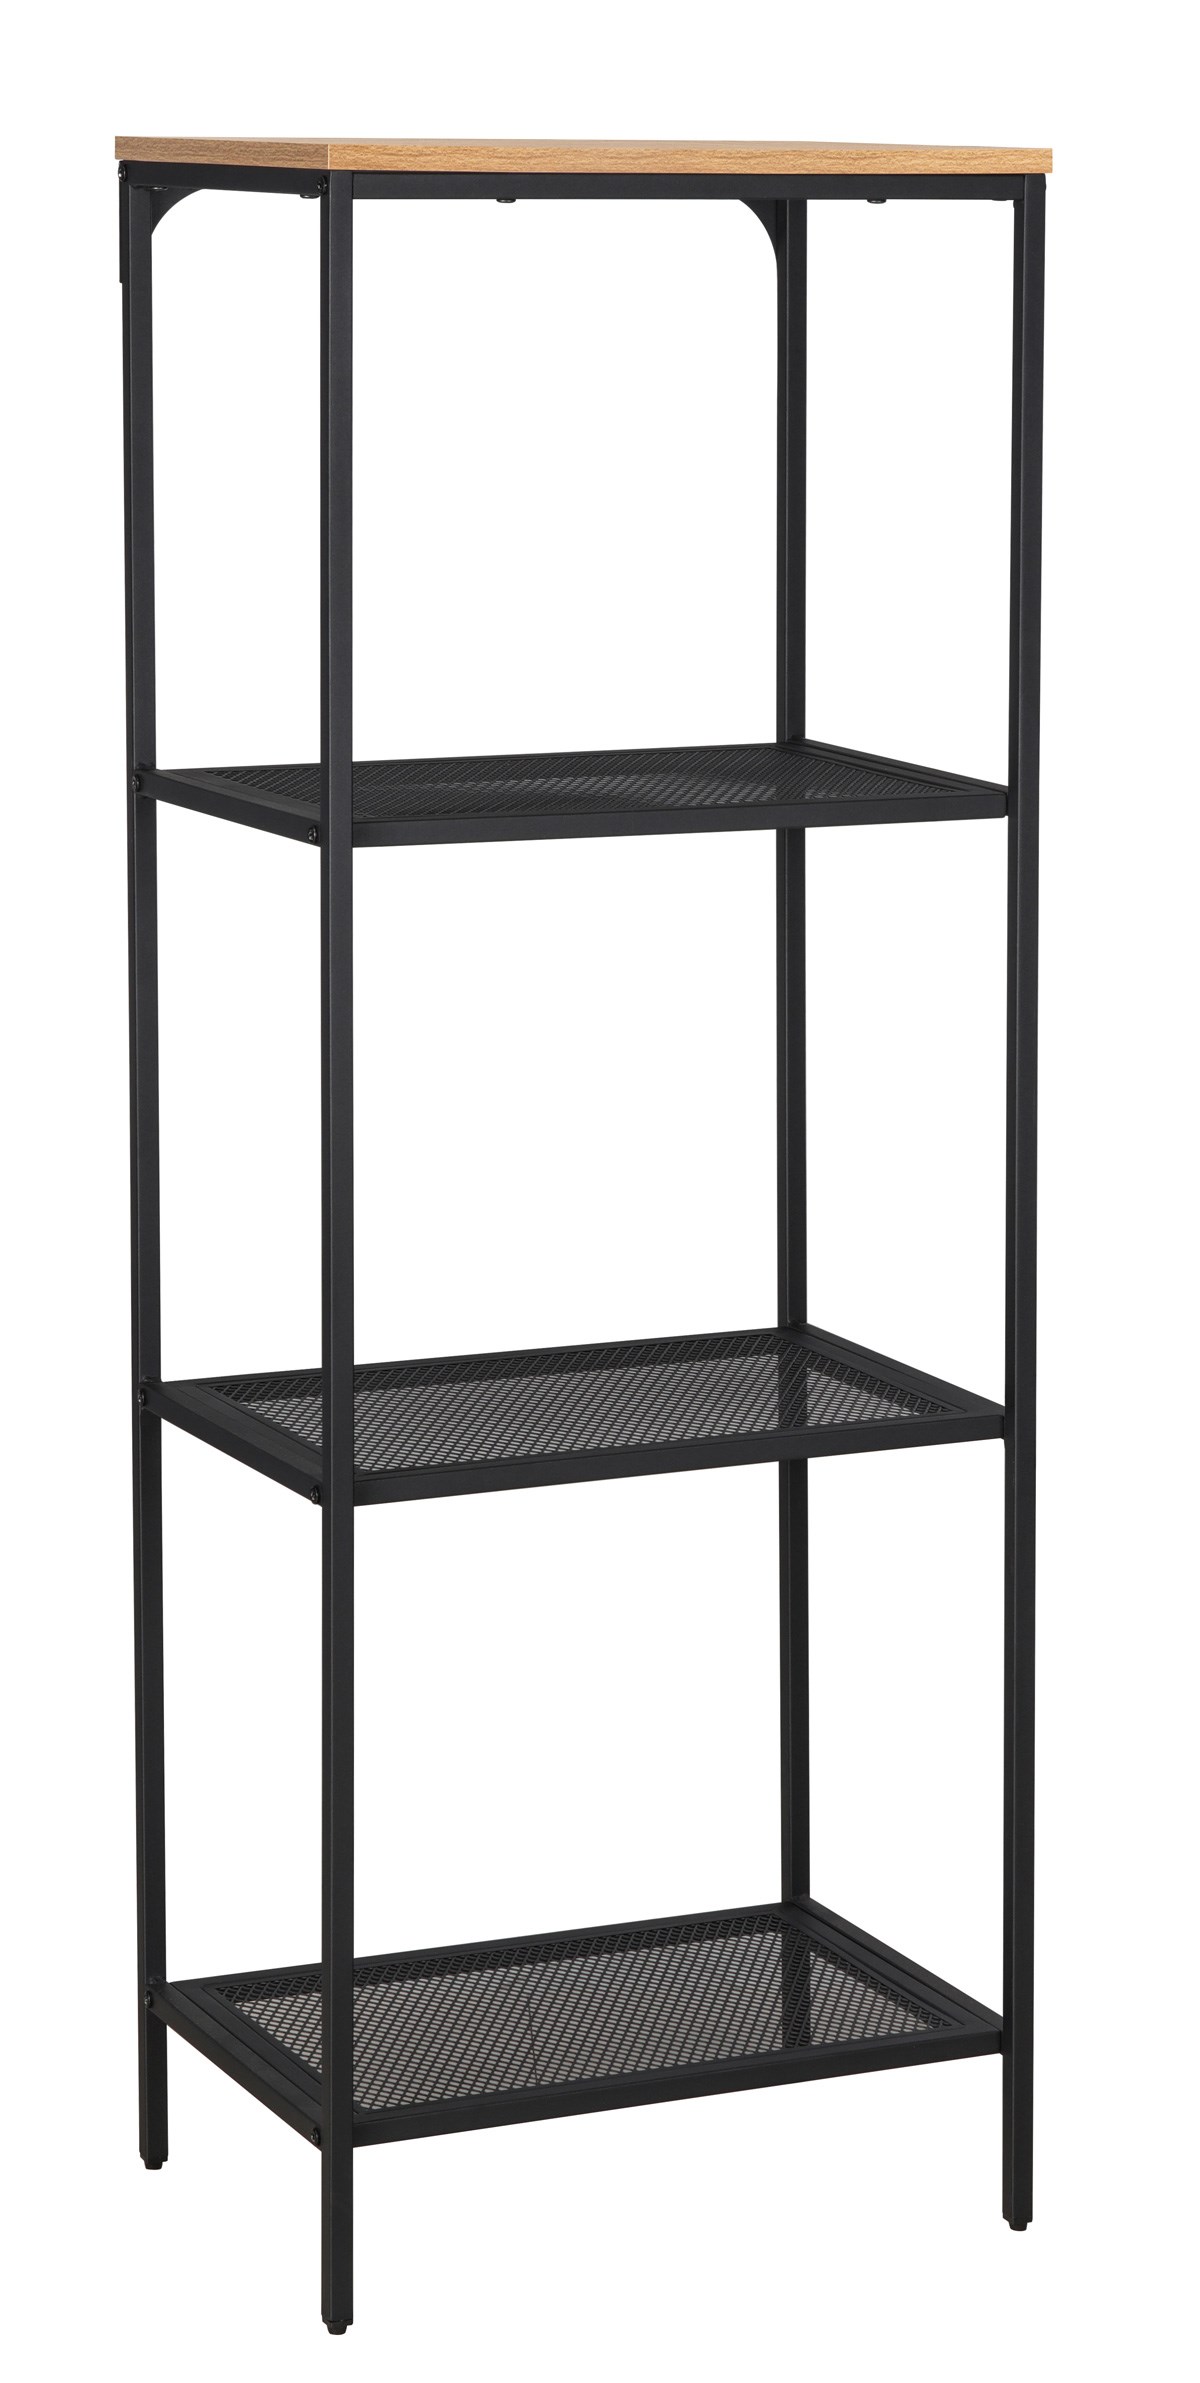 Bibliotheque-etagere-Heleen-bois-metal-frosted-black-leg-side-Comodi-Living